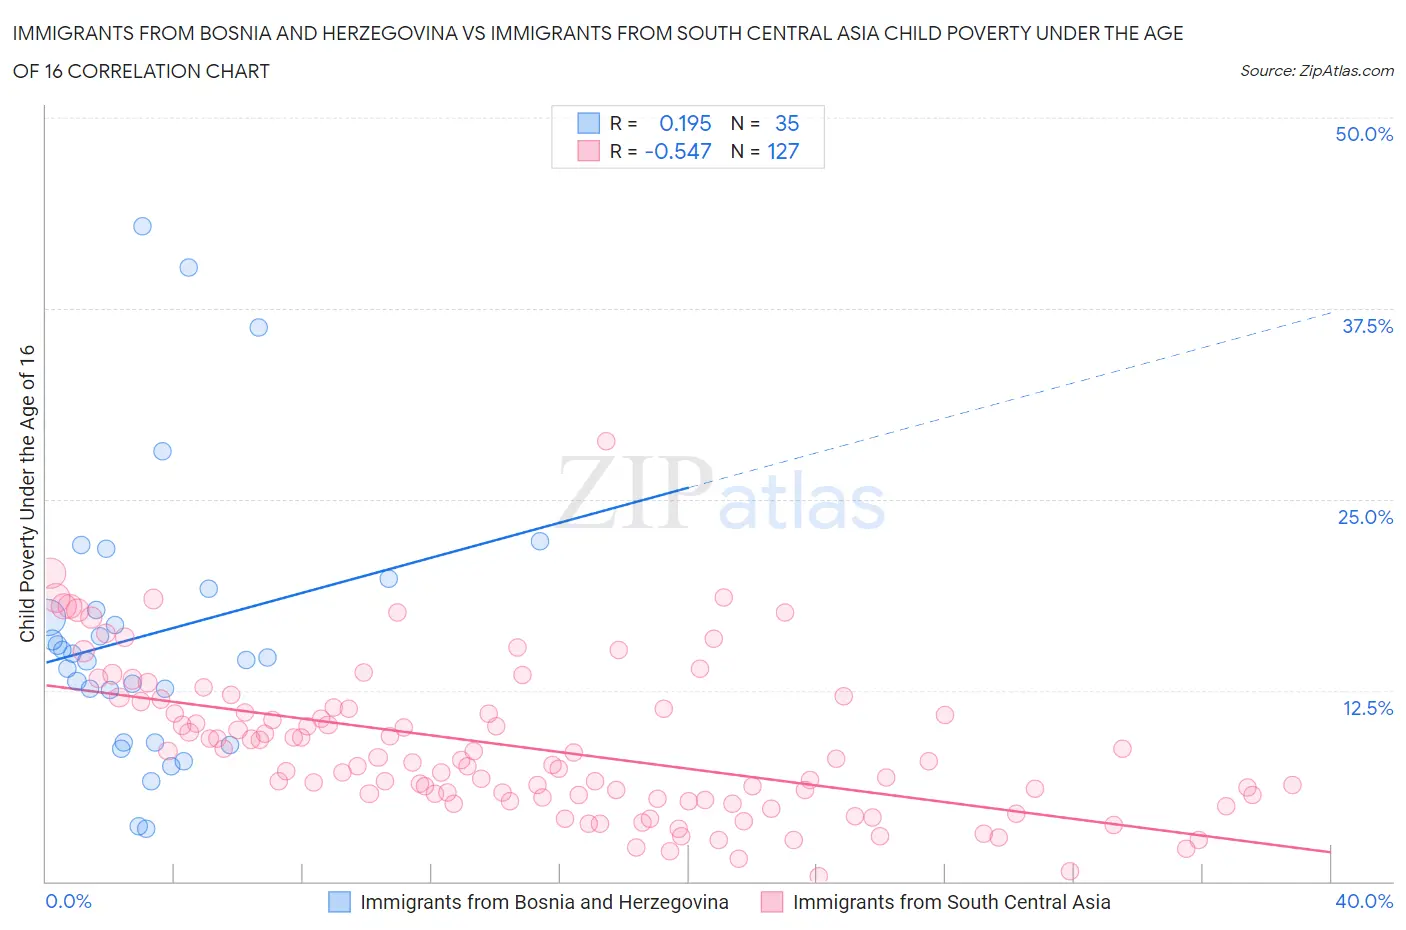 Immigrants from Bosnia and Herzegovina vs Immigrants from South Central Asia Child Poverty Under the Age of 16